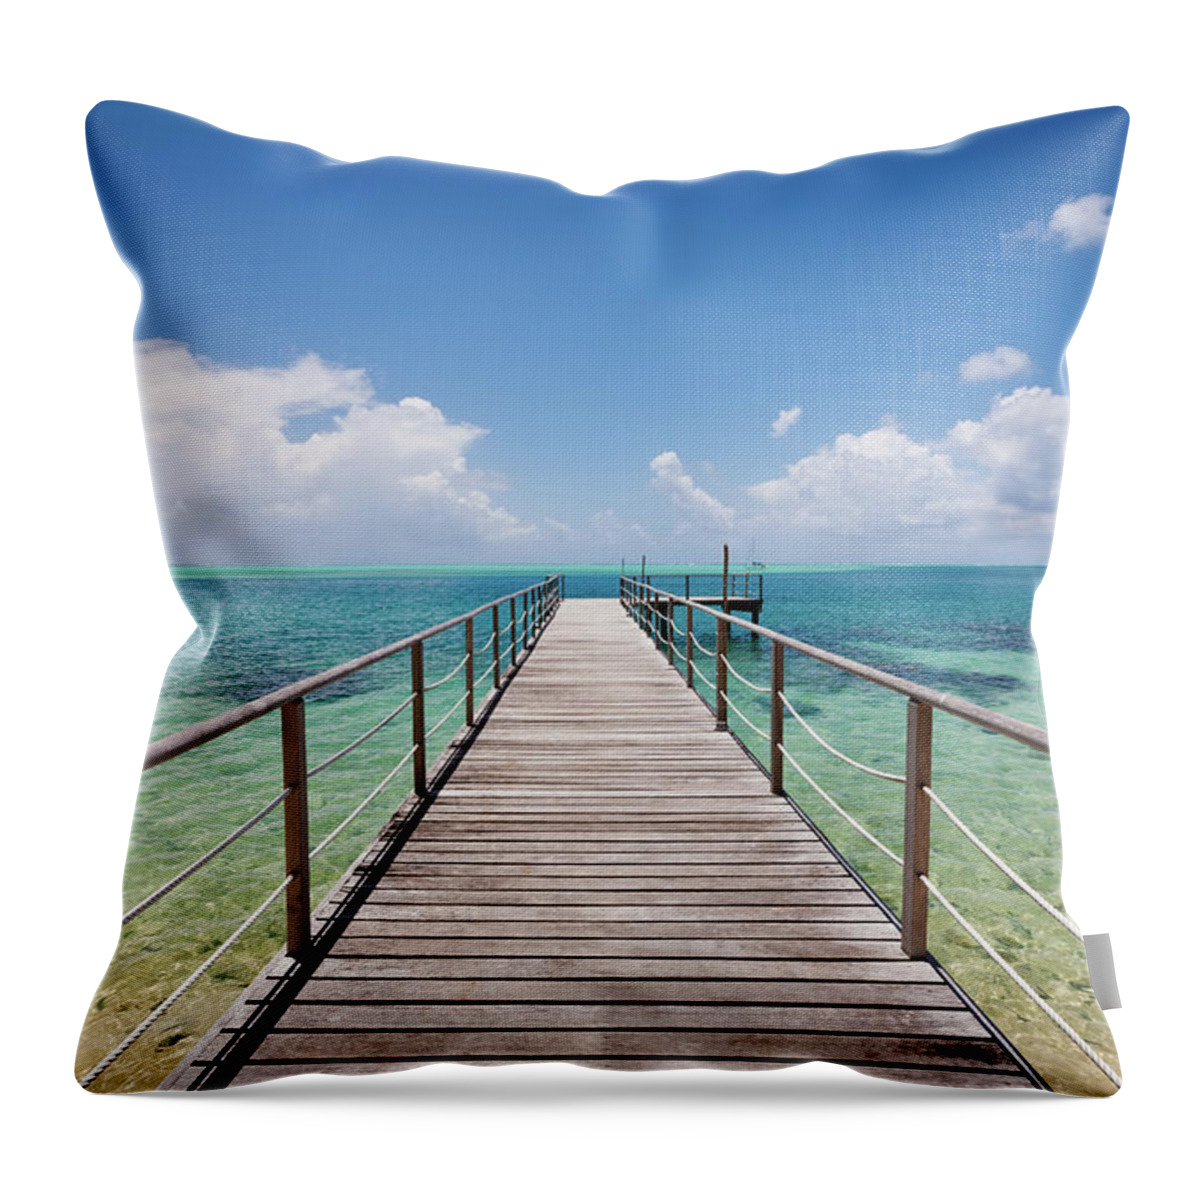 Sailboat Throw Pillow featuring the photograph Endless Pier Into Lagoon Huahine Island by Mlenny